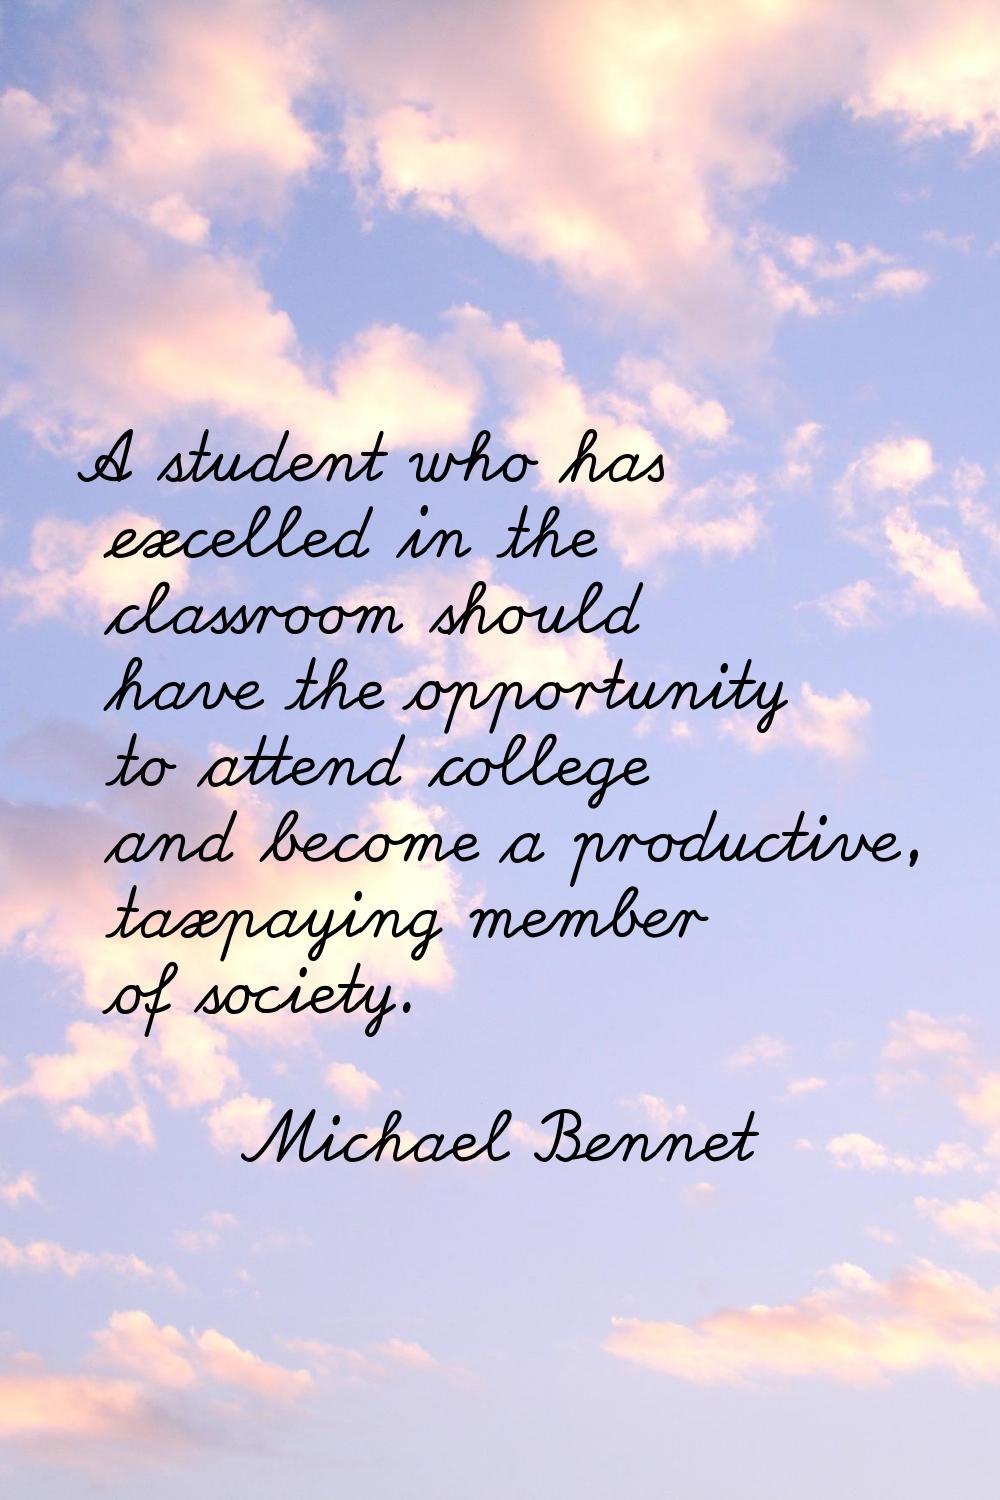 A student who has excelled in the classroom should have the opportunity to attend college and becom